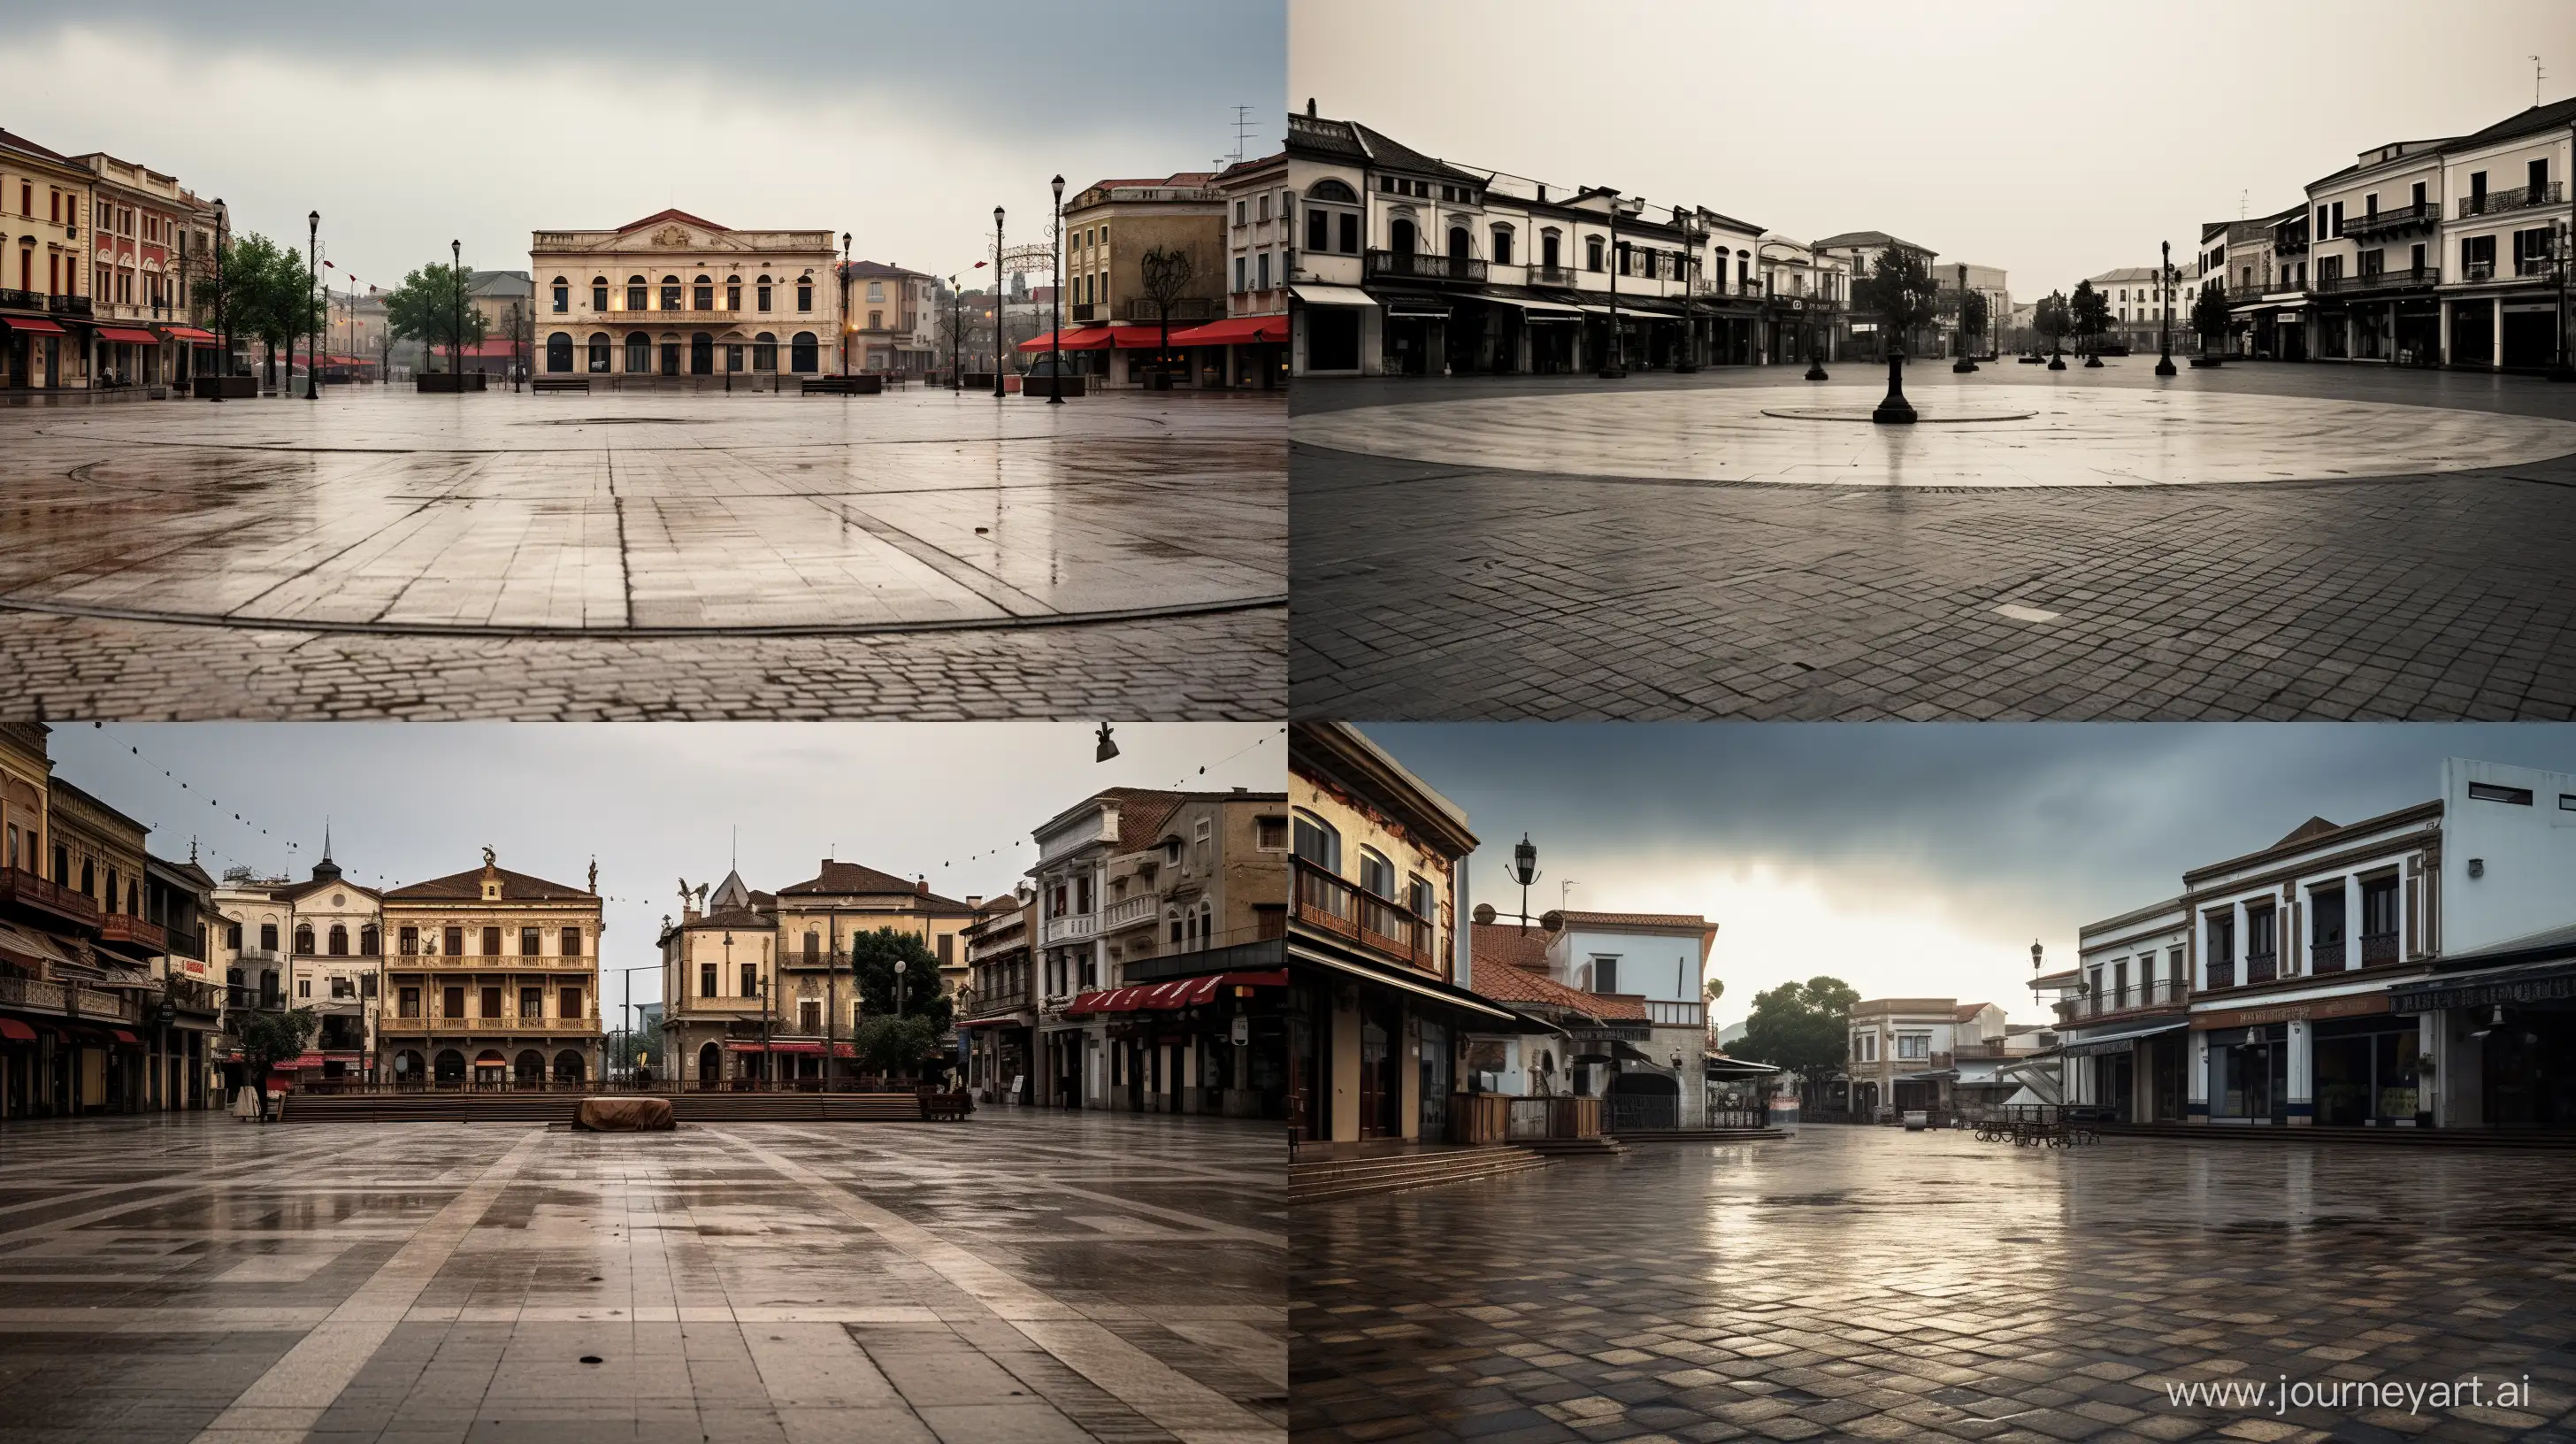 A ban on music and dance enforced by the town council, creating an eerie silence in the once lively town square. The atmosphere is somber, with a sense of loss and restraint. Photography, capturing the deserted square with a wide-angle lens to emphasize the emptiness, Photography, realistic style with a 50mm lens, capturing the details of the market and people, --ar 16:9